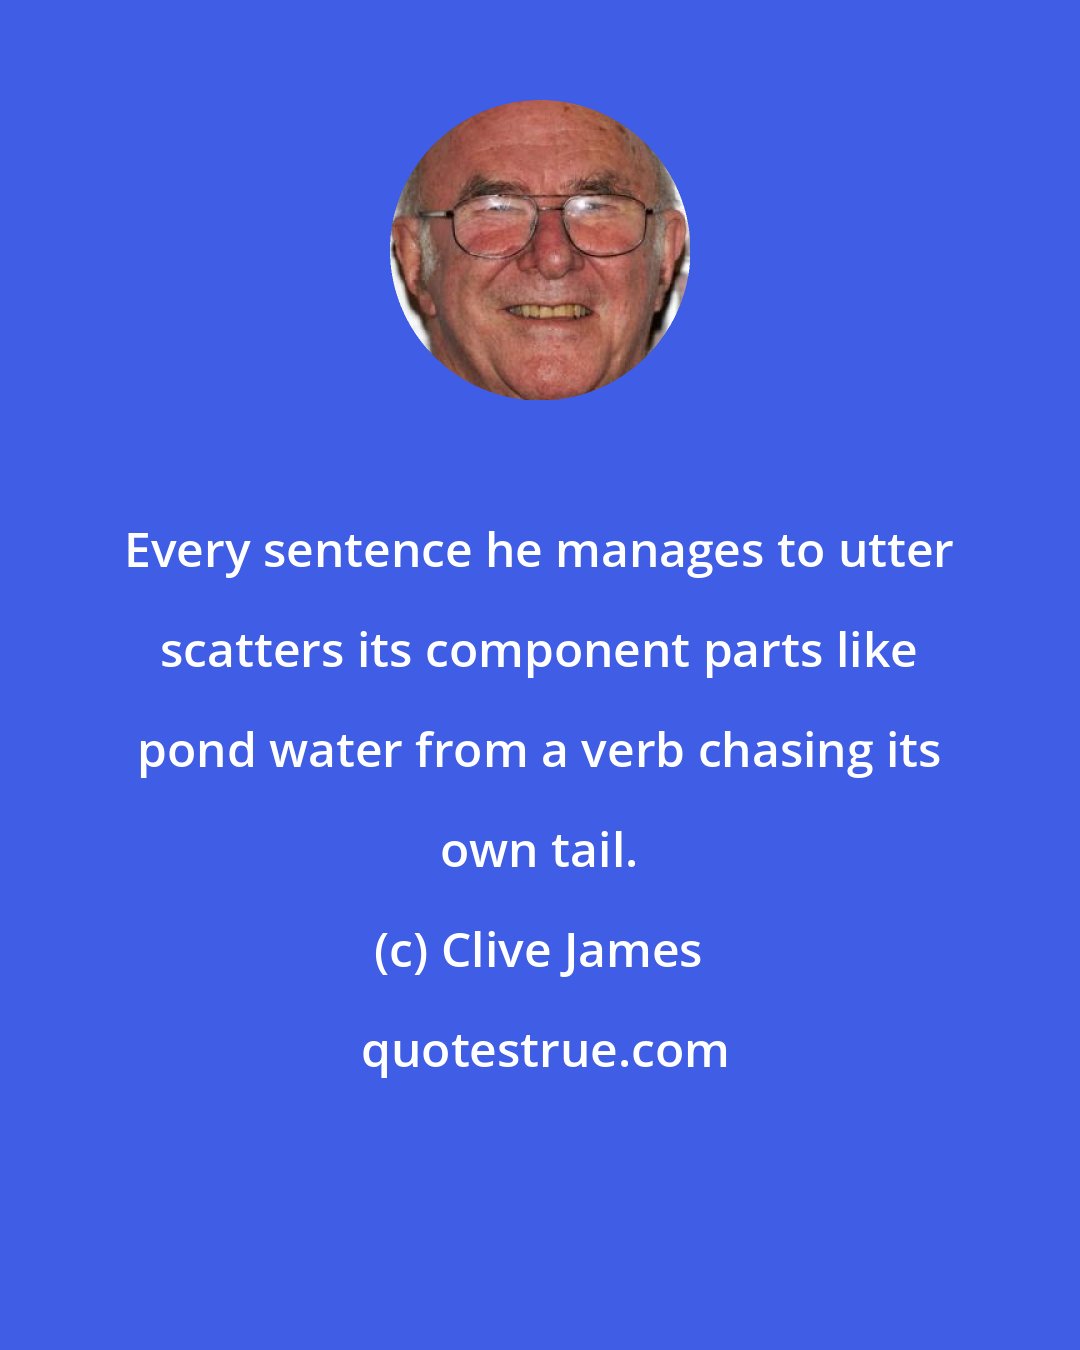 Clive James: Every sentence he manages to utter scatters its component parts like pond water from a verb chasing its own tail.